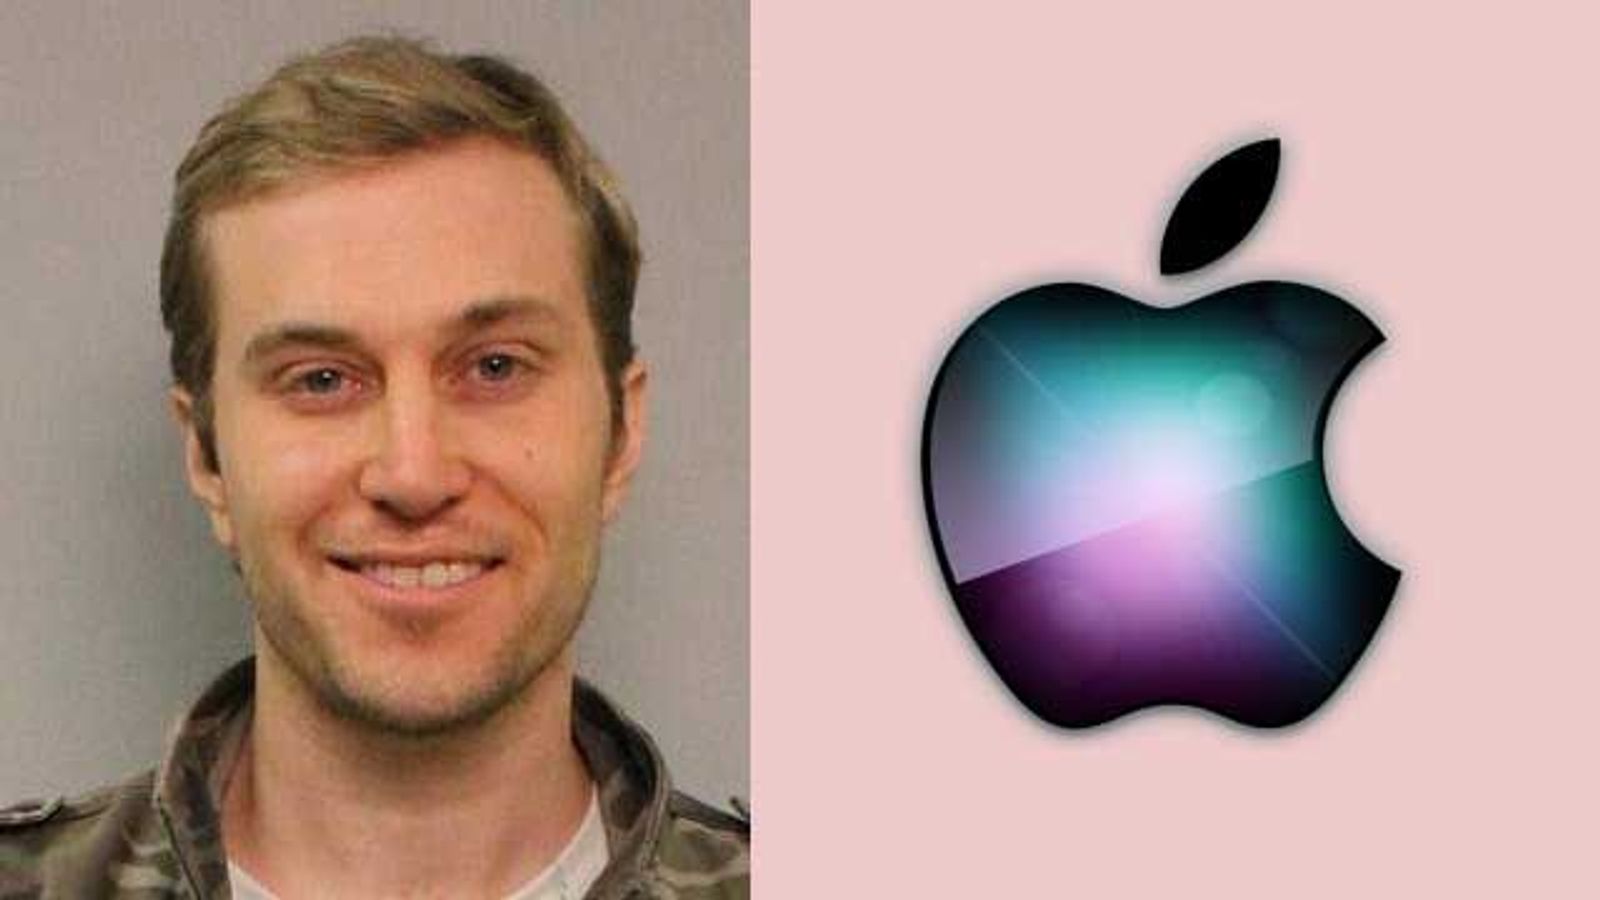 Man Who Sued Apple for Not Blocking Porn in the News Again